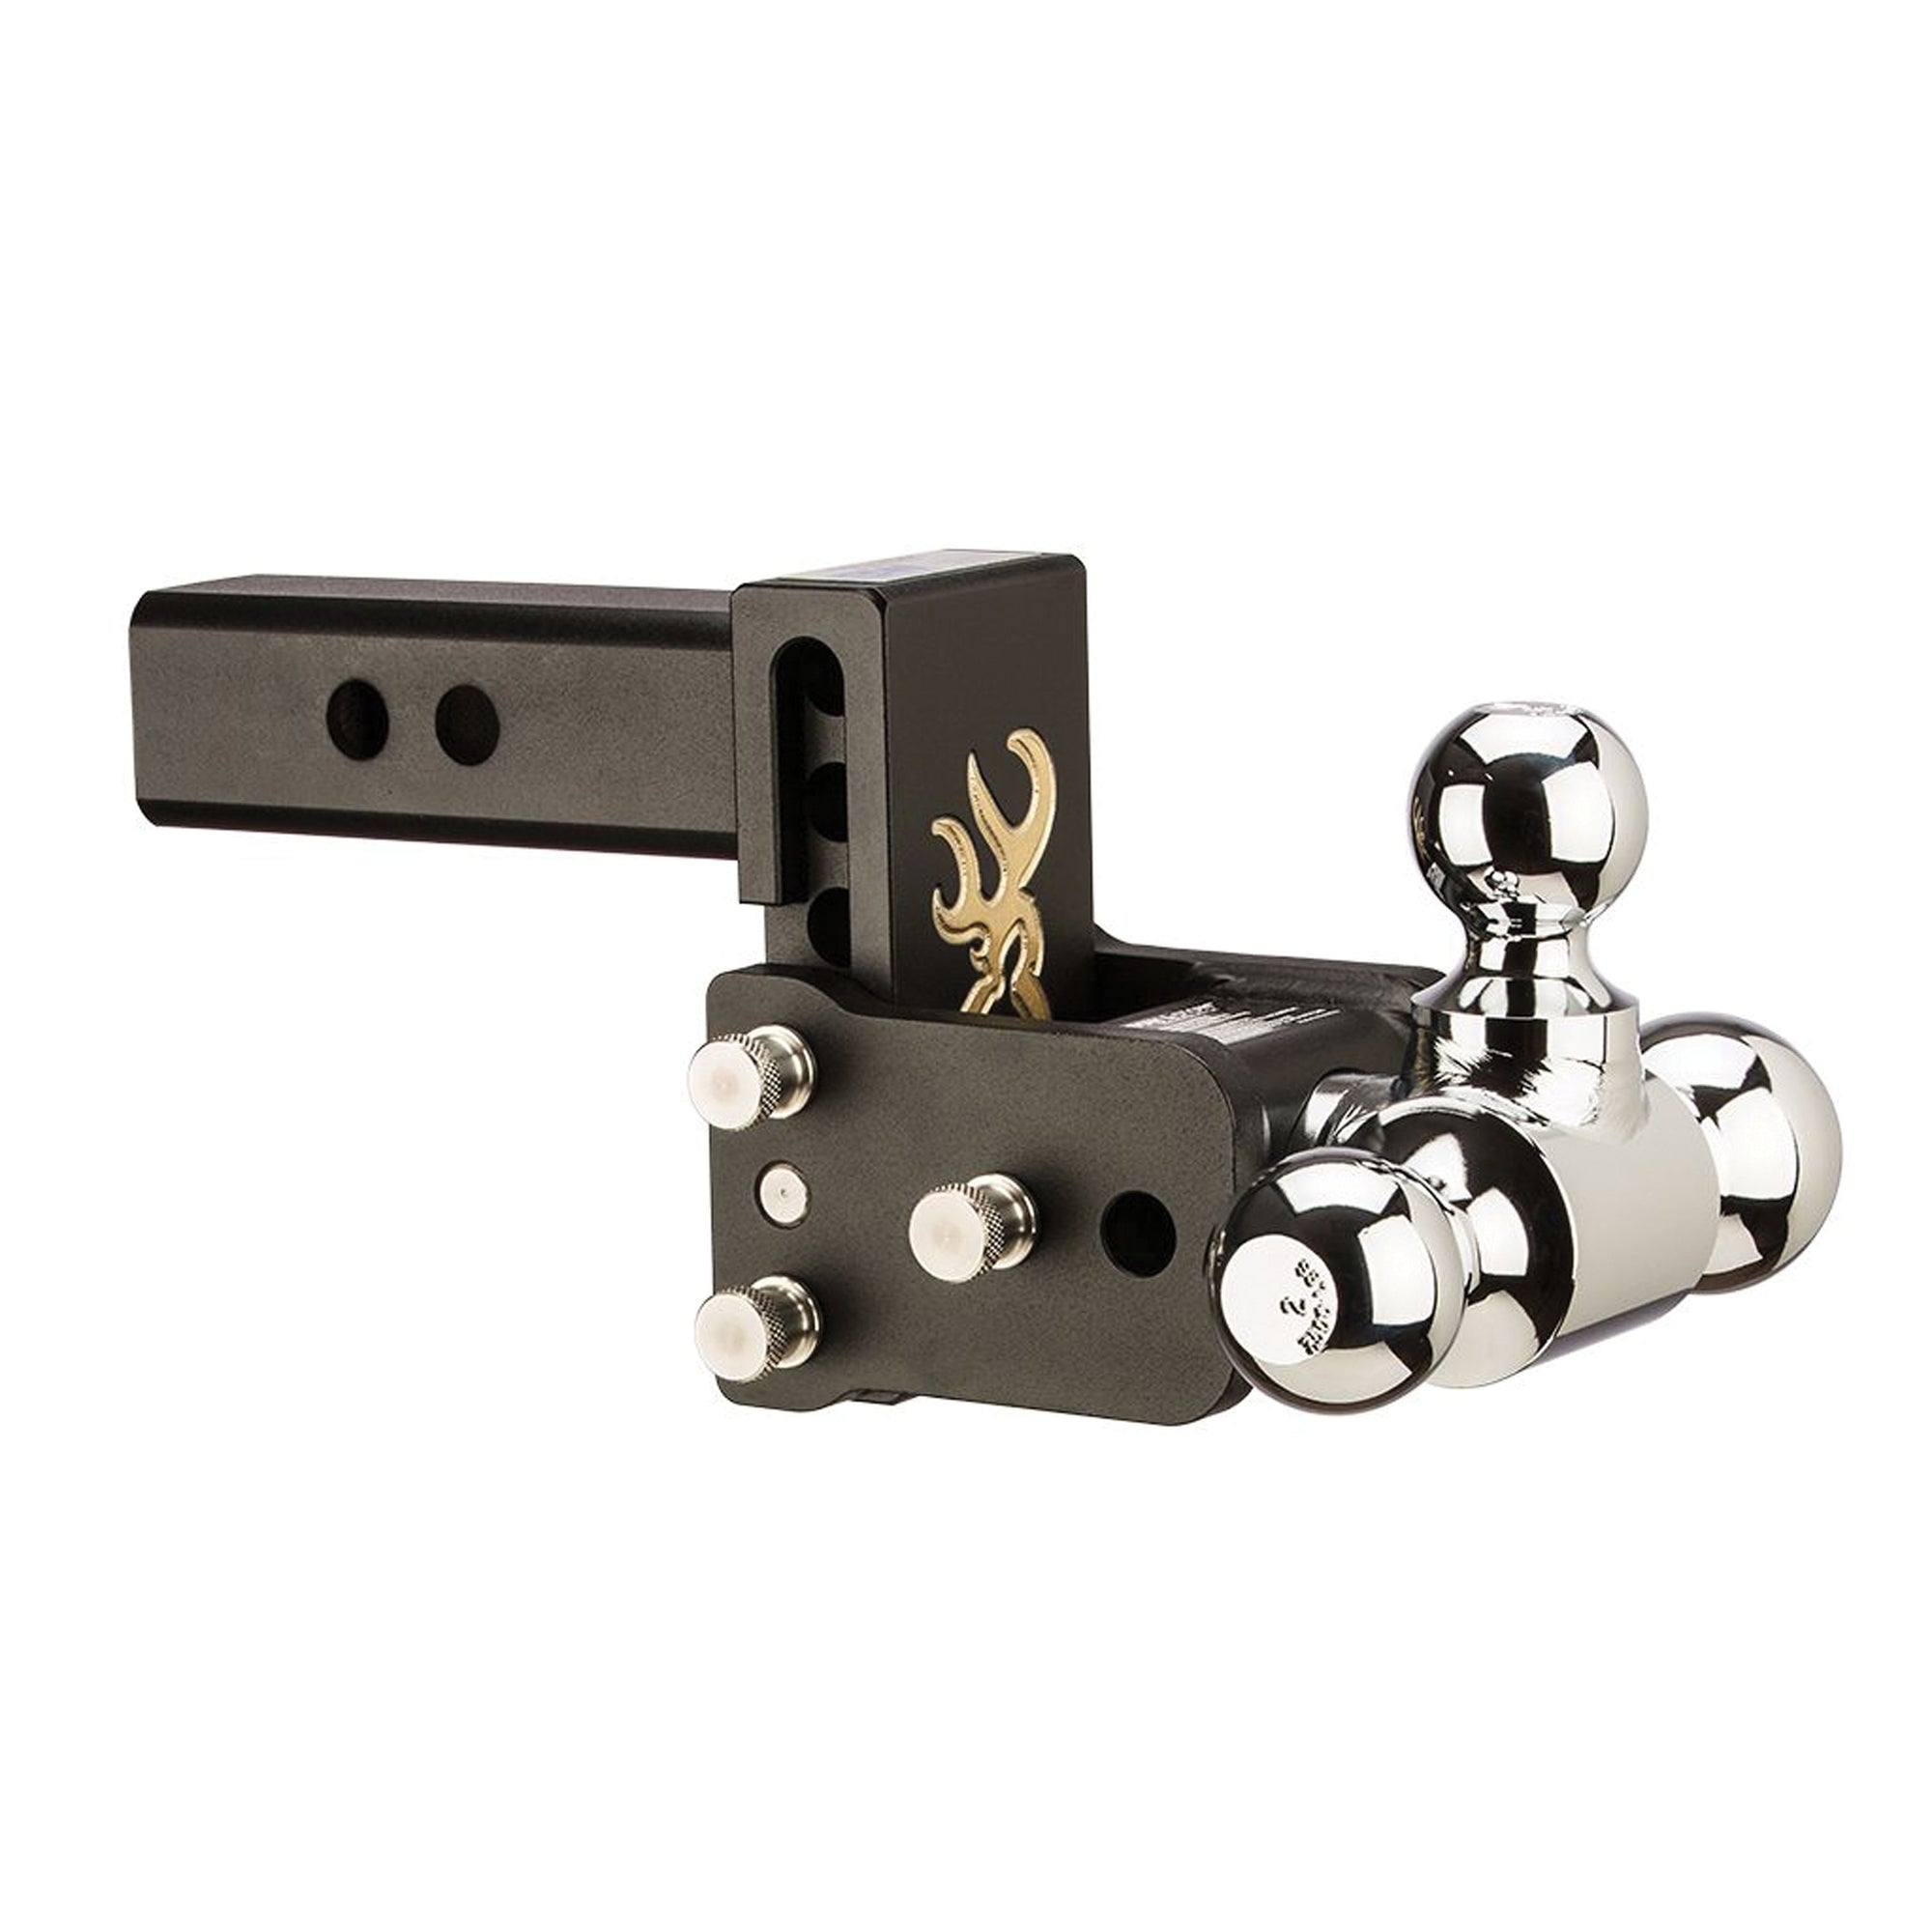 B&W Trailer Hitches TS10048BB Tow and Stow Adjustable Ball Mount - 1-7/8", 2" & 2-5/16" Ball, 5" Drop, 5.5" Rise, Black